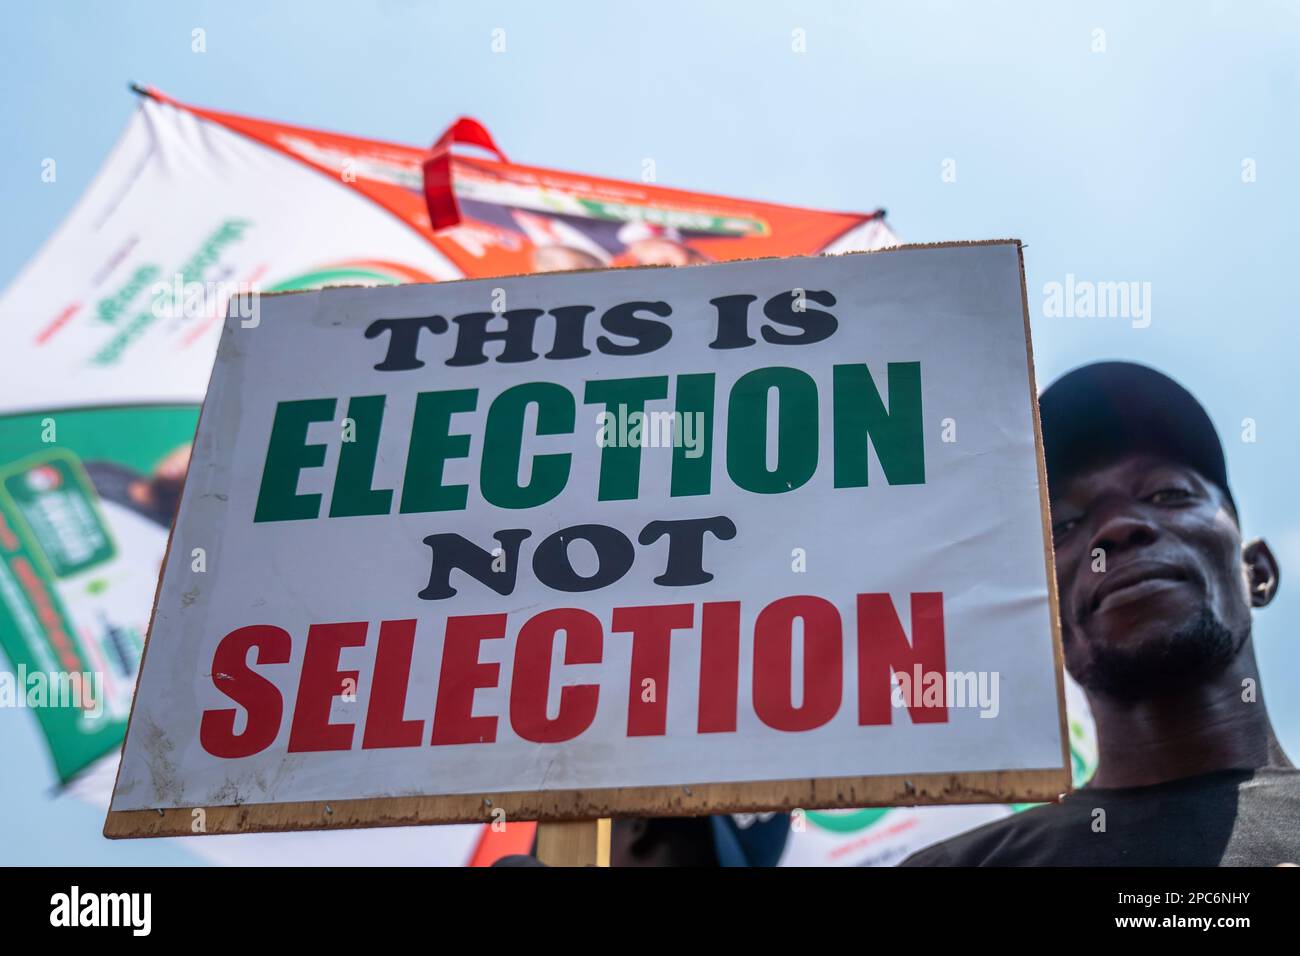 Supporters of the Peoples Democratic Party (PDP) protest at the national headquarters of the Independent National Electoral Commission (INEC) in Abuja to disapprove the outcome of the February 25th election result. Abuja, Nigeria. Stock Photo